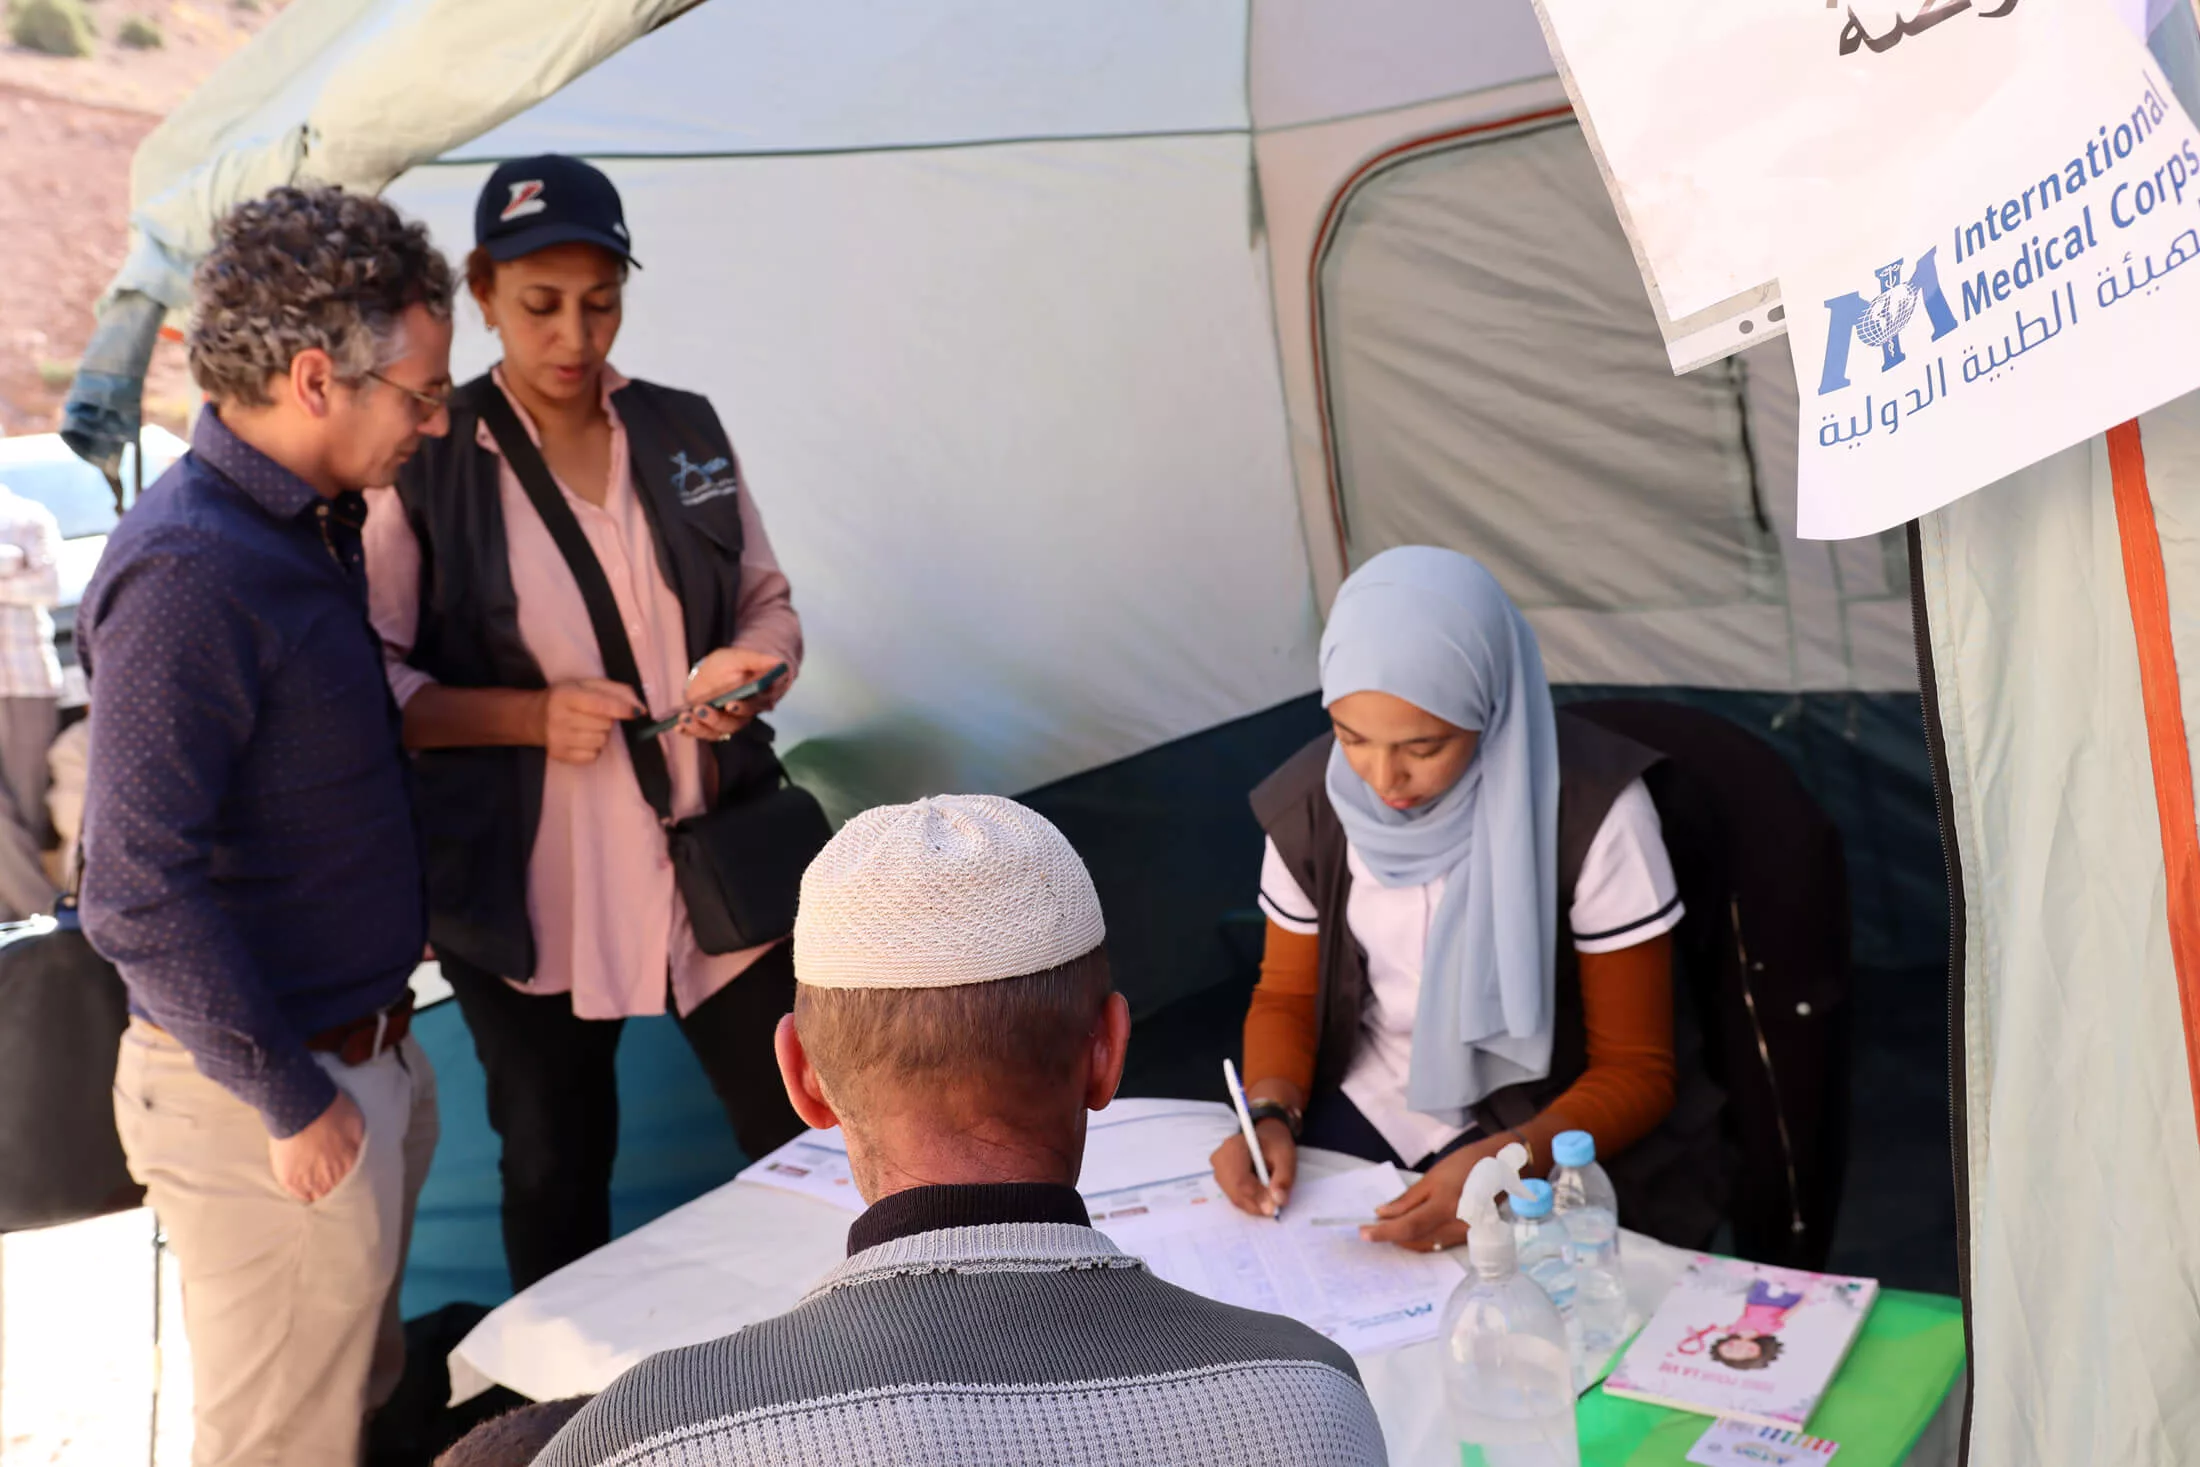 Staff members provide health consultations and routine blood pressure checks on people affected by the Morocco earthquake.